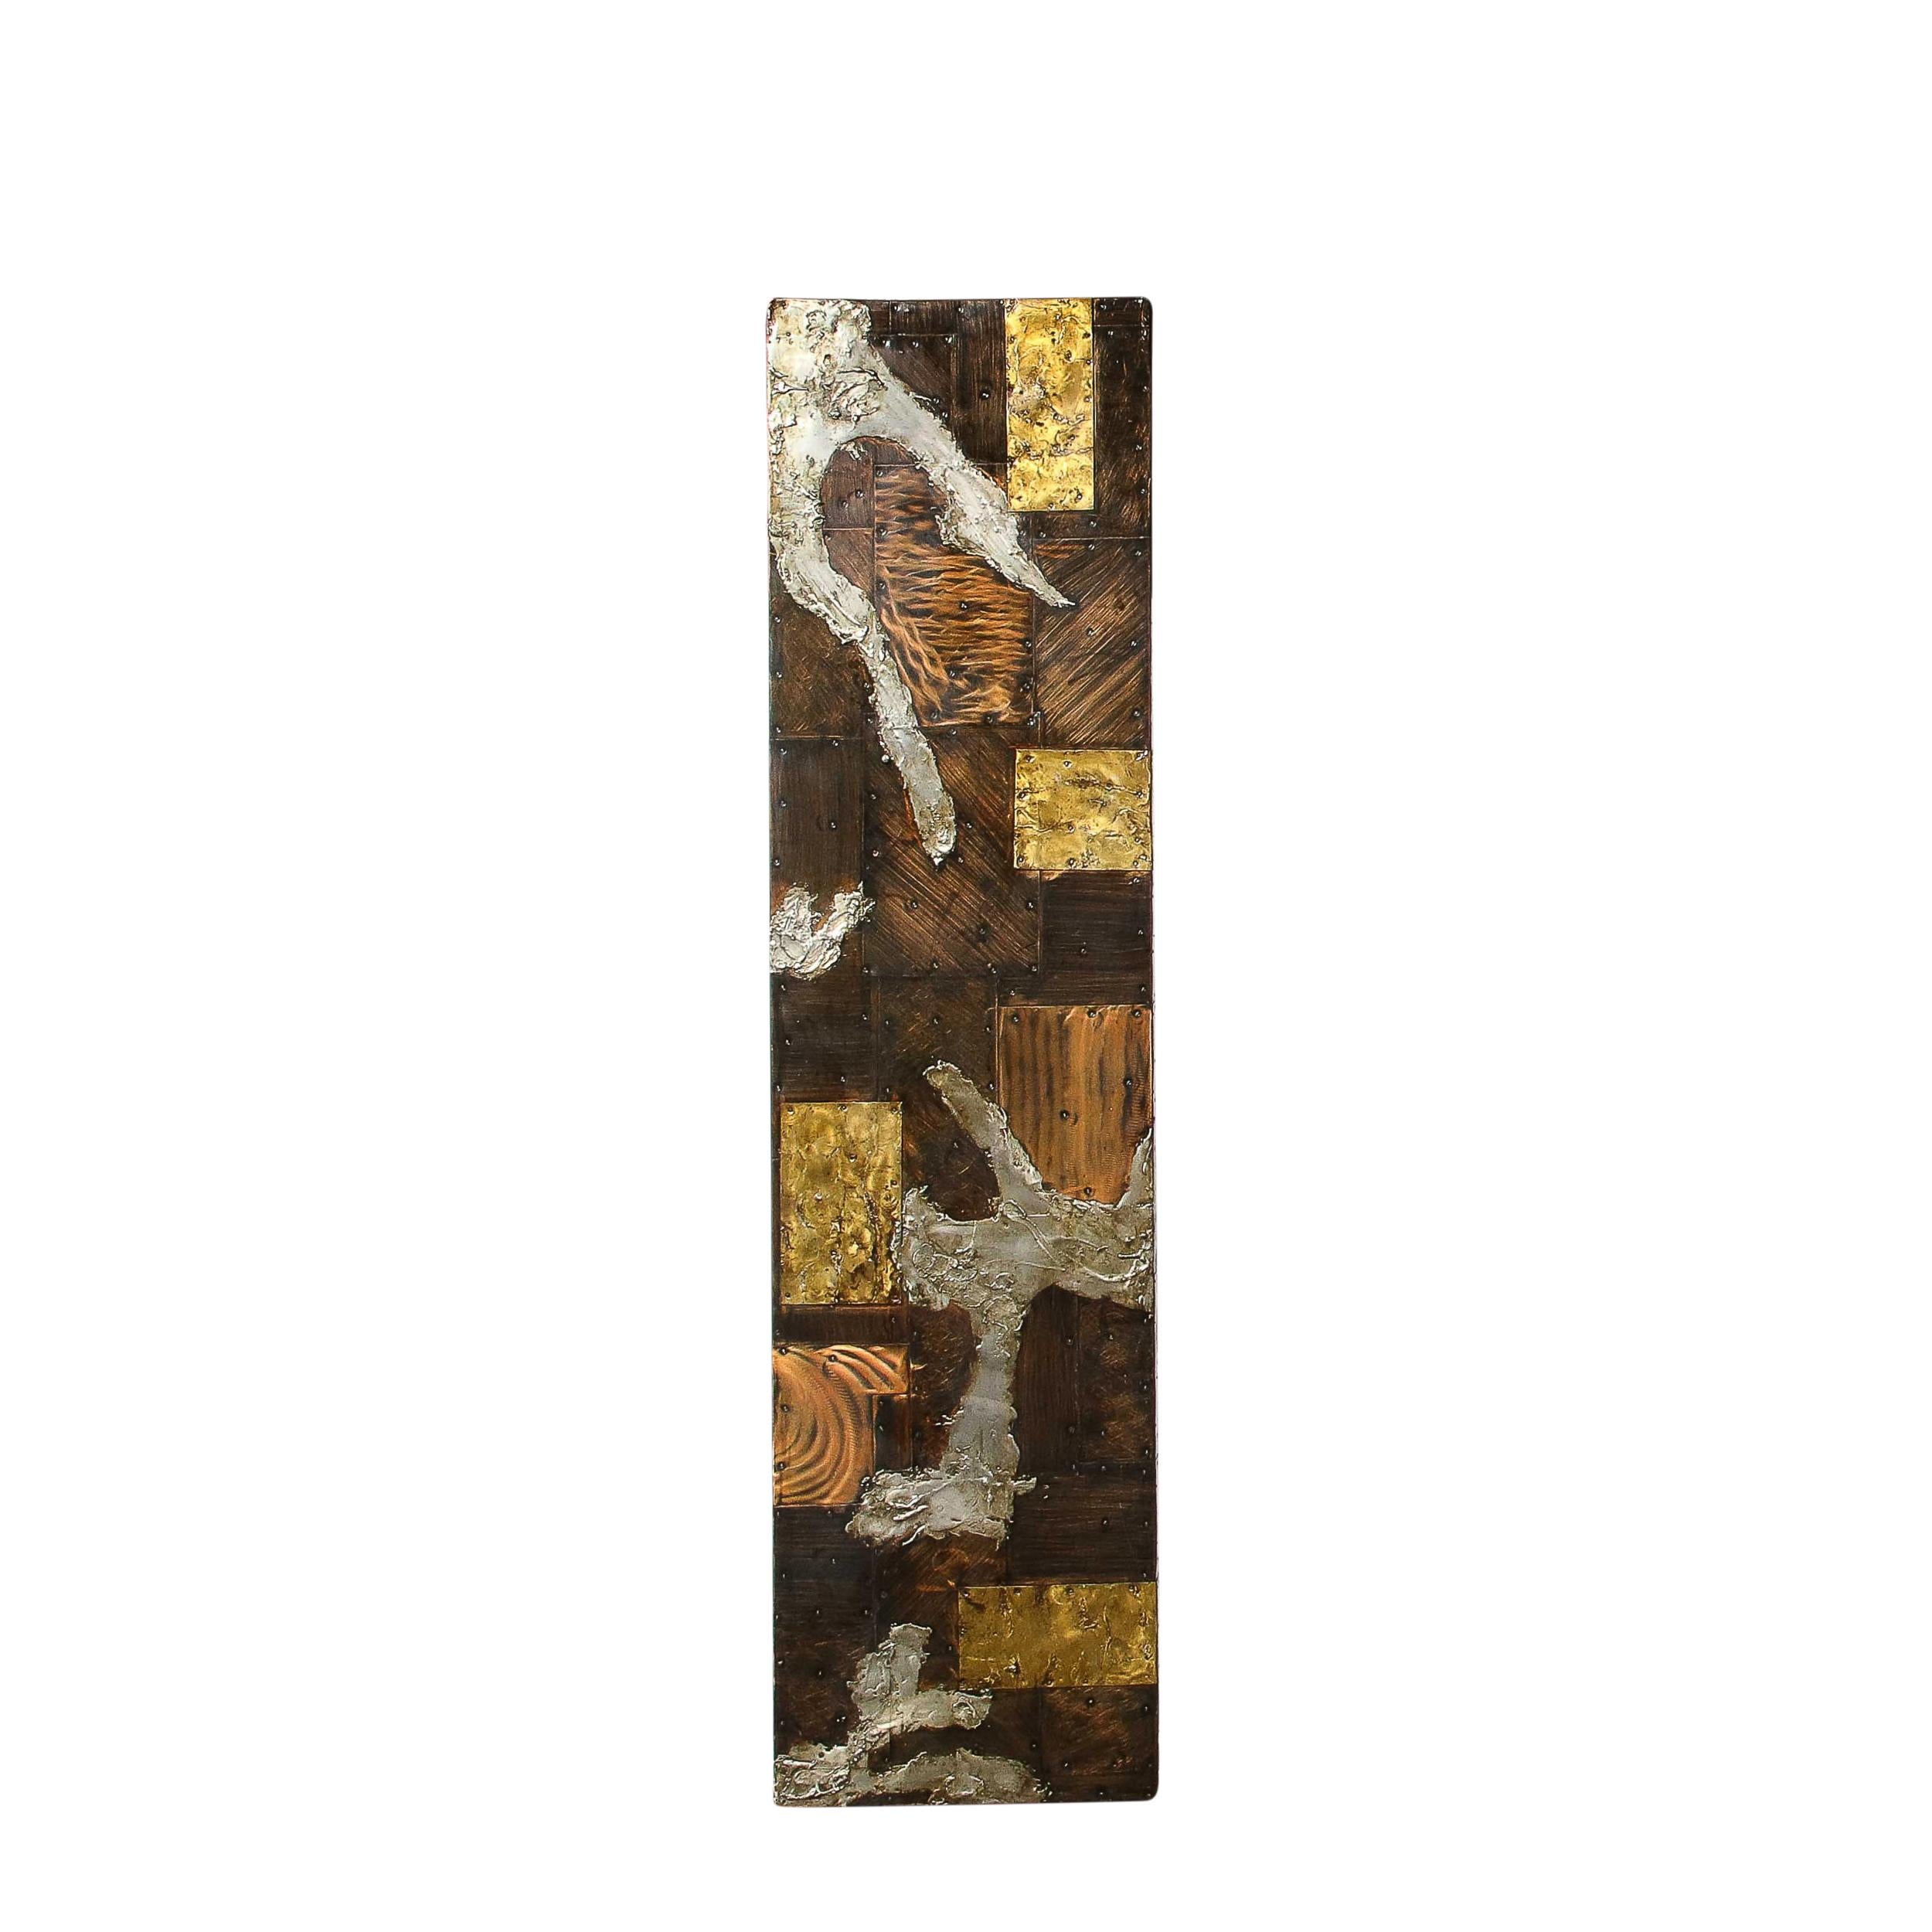 This sophisticated and important wall mounted sculpture was realized by the legendary 20th century American designer Paul Evans in 1973. This piece features the metal patchwork for which he is most renowned, and is an especially strong example of